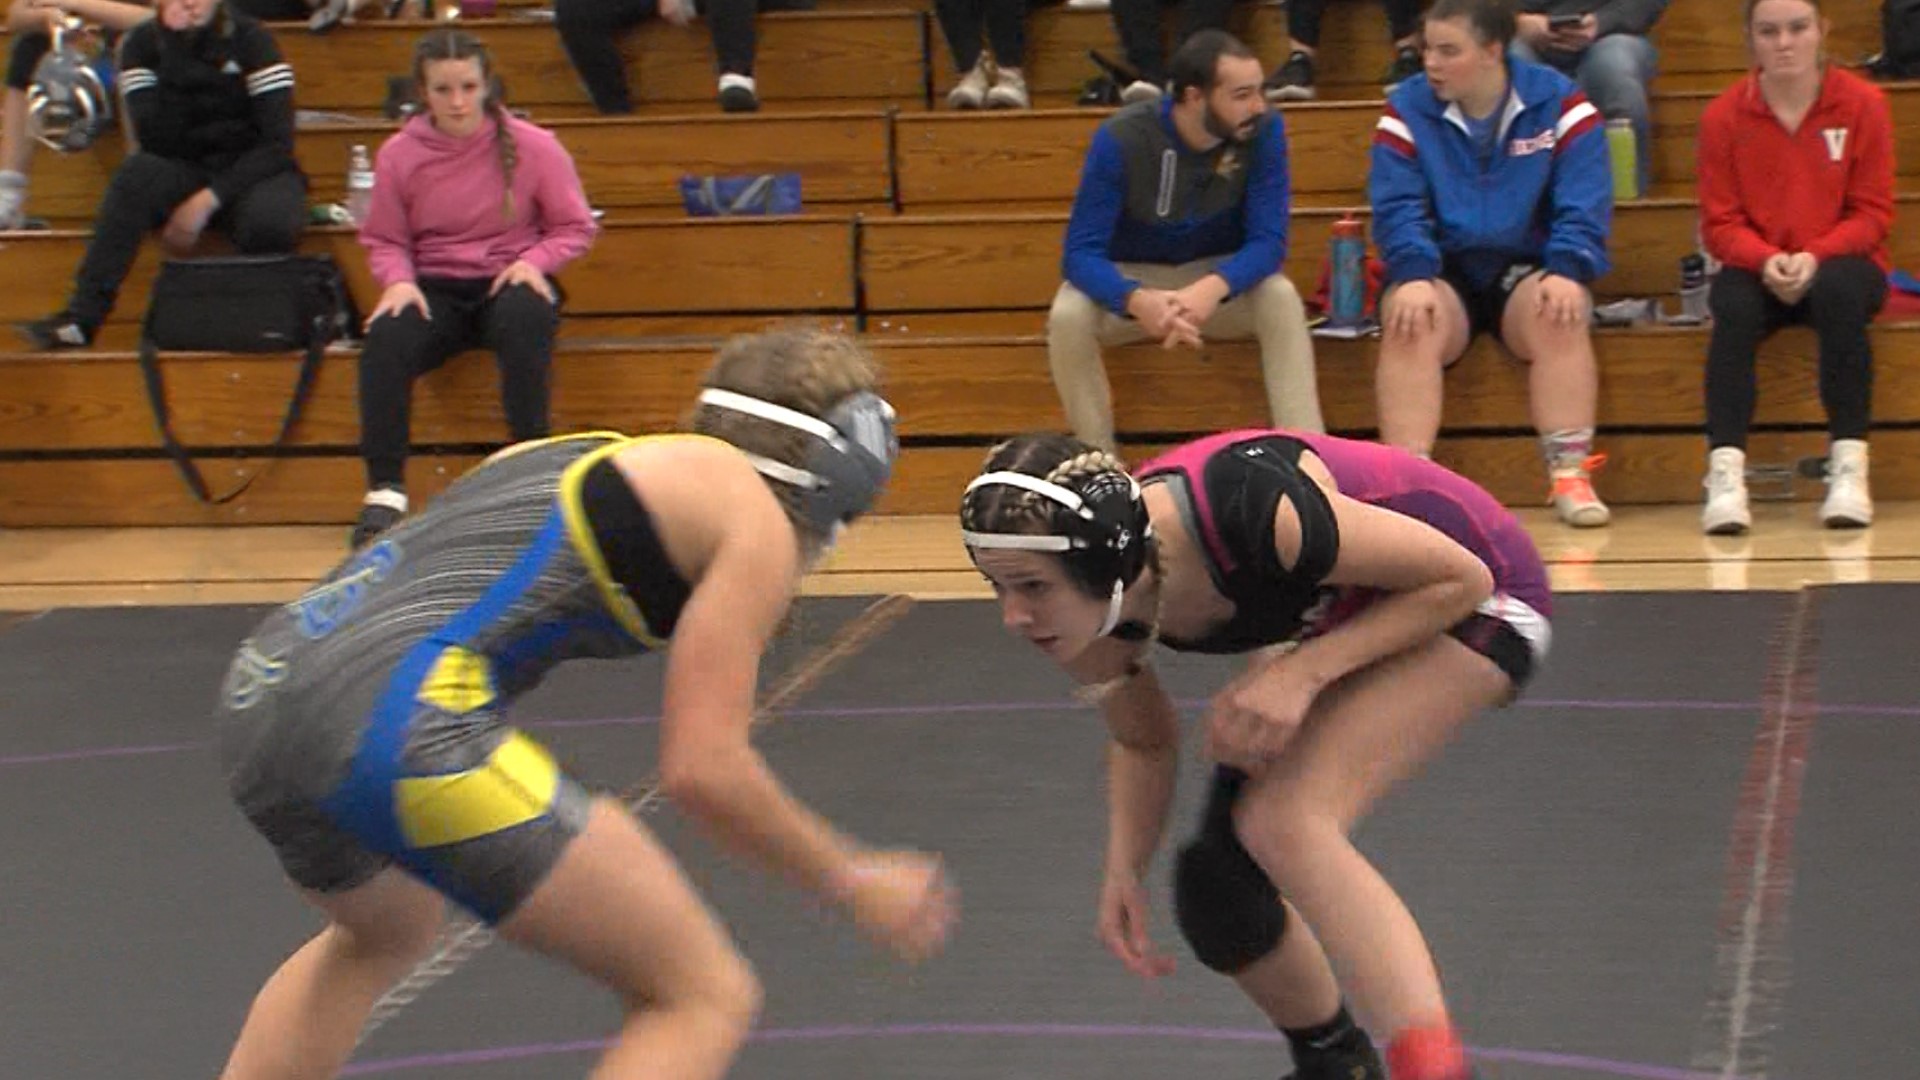 Monday marked the first-ever sanctioned high school girls wrestling match in Iowa.